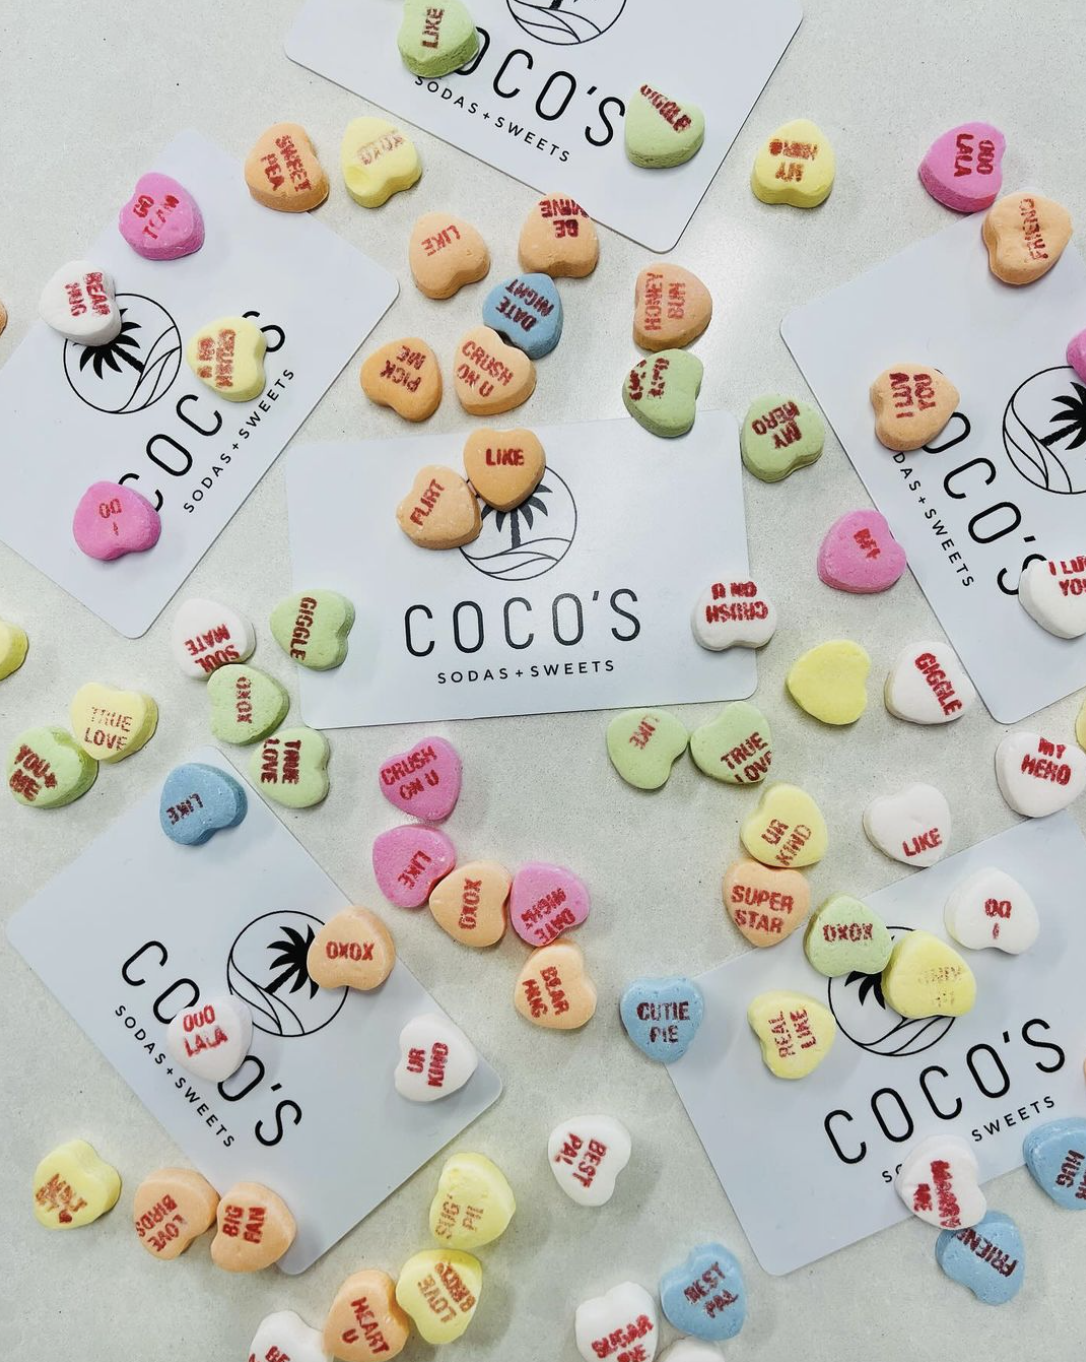 Picture of Coco's gift cards surrounded by candy hearts.